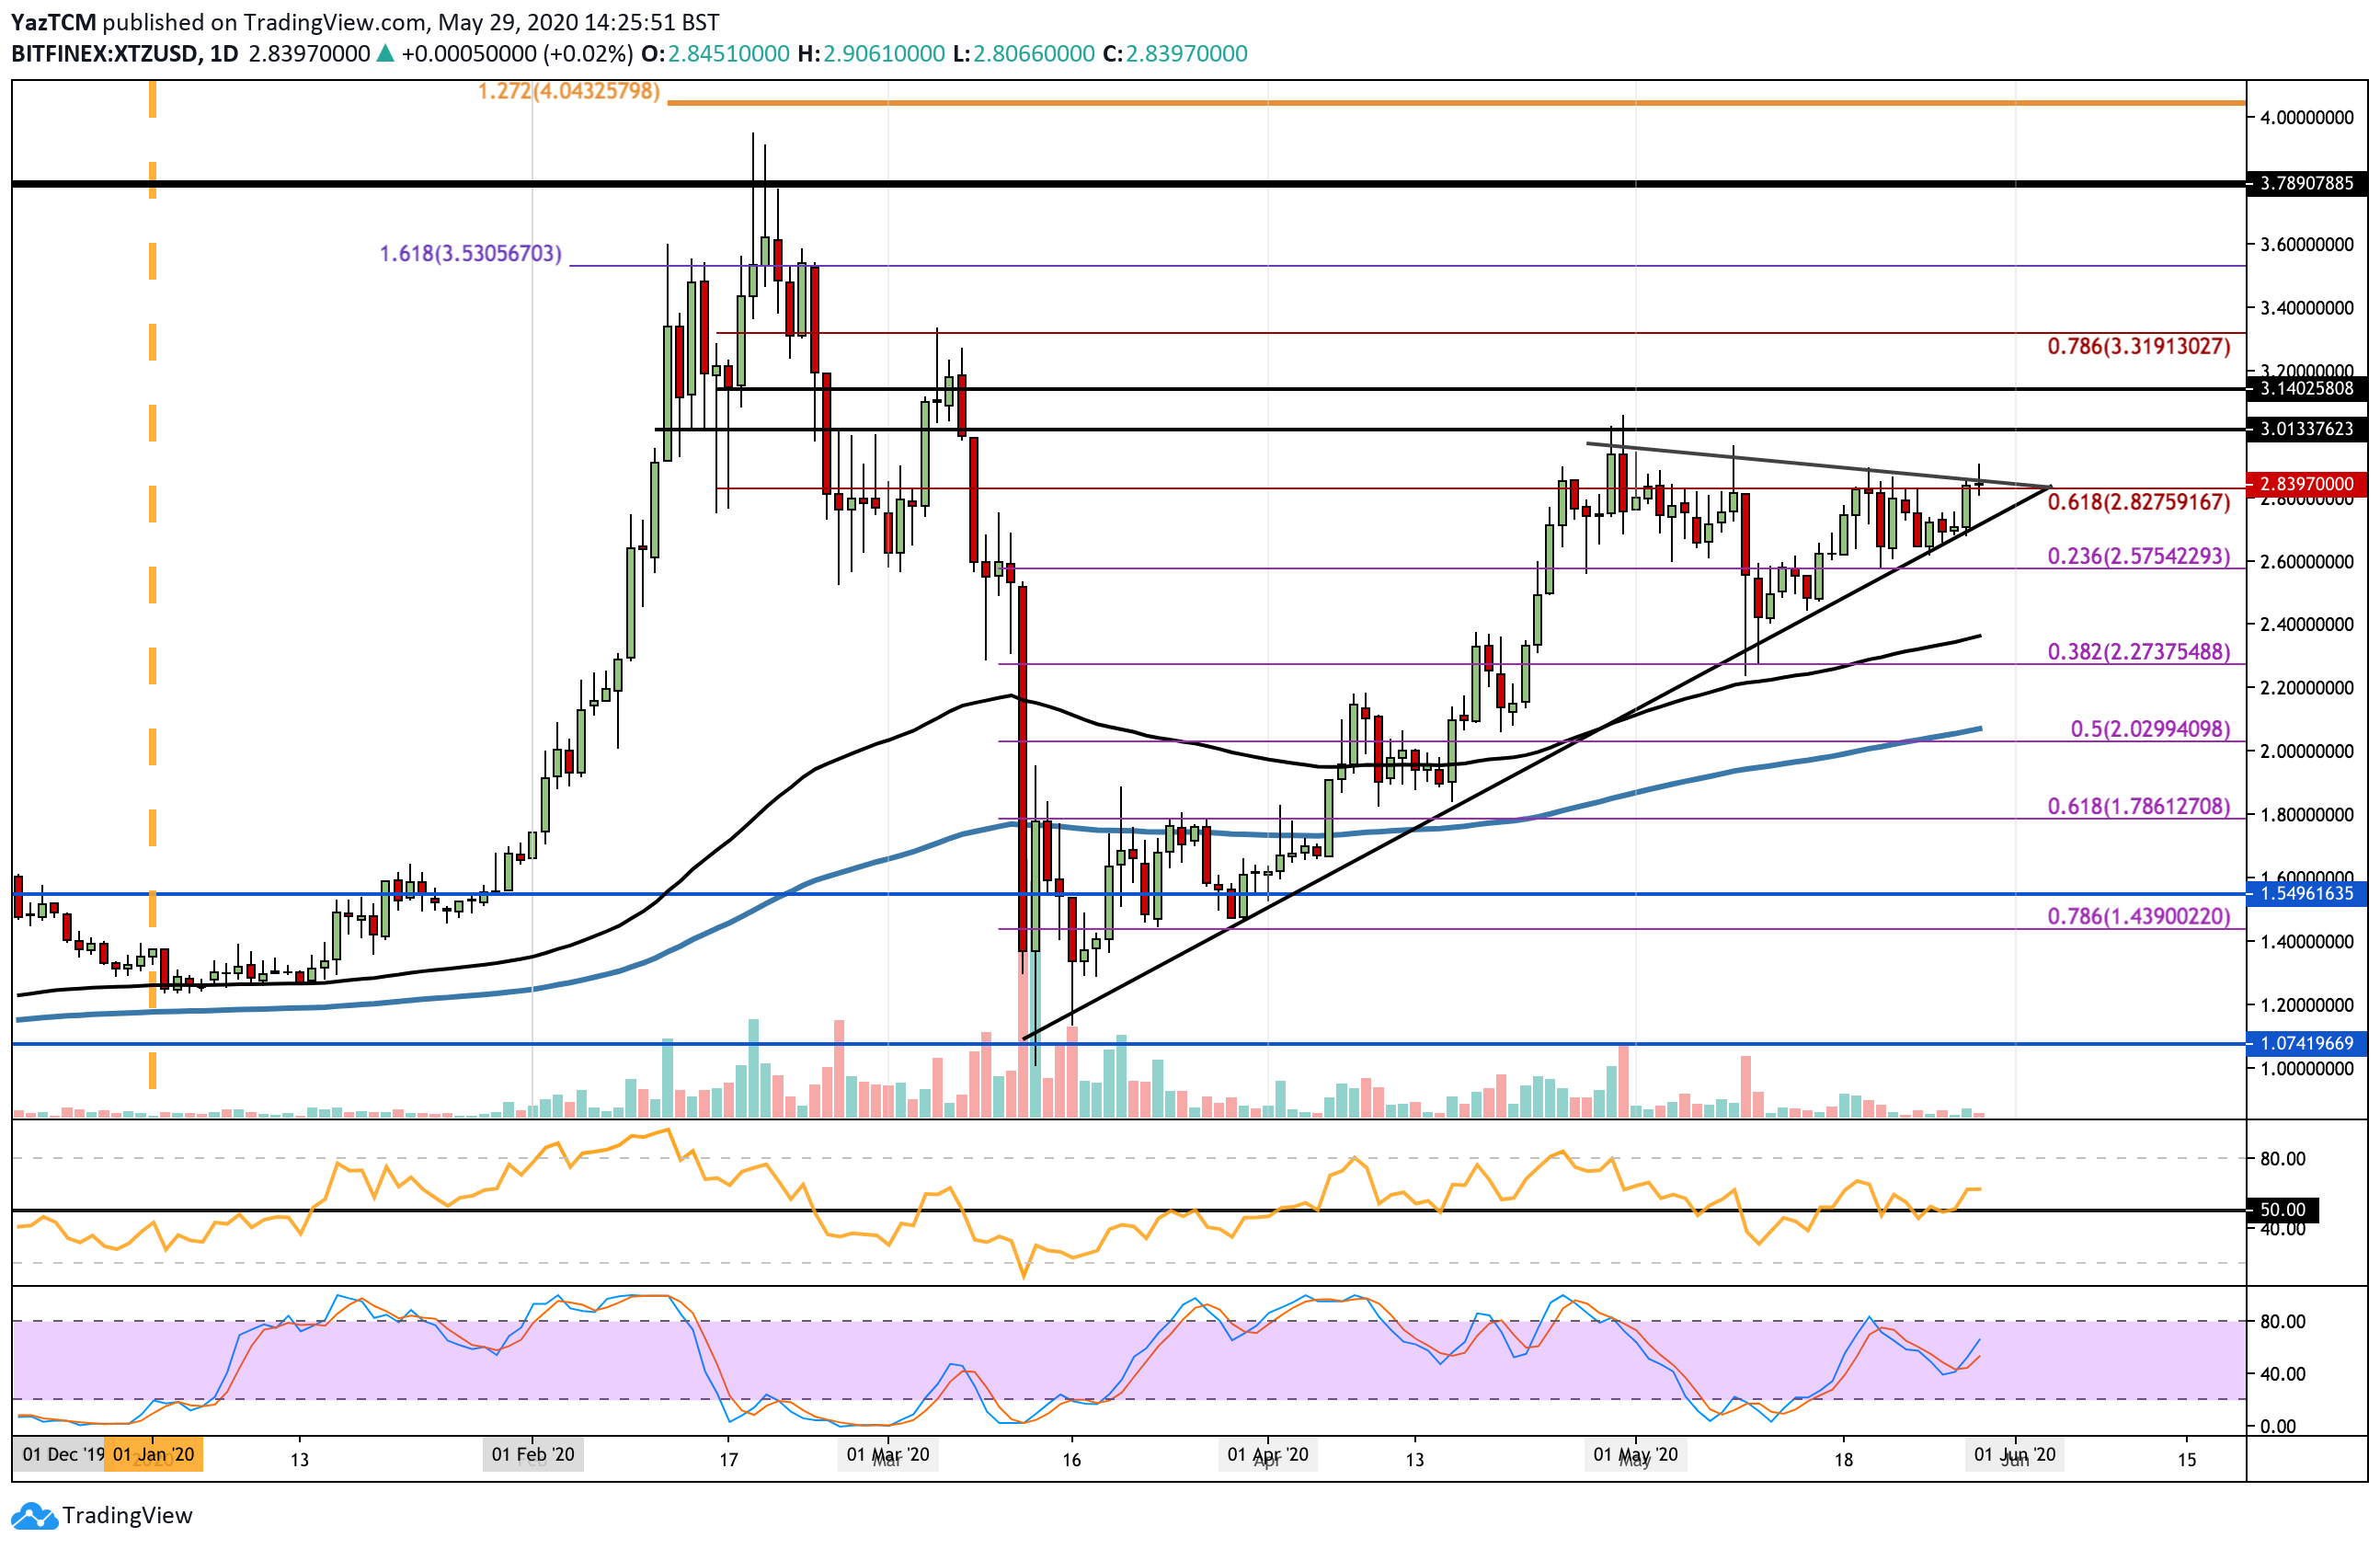 Crypto Price Analysis & Overview May 29th: Bitcoin, Ethereum, Ripple, Tezos, and Chainlink